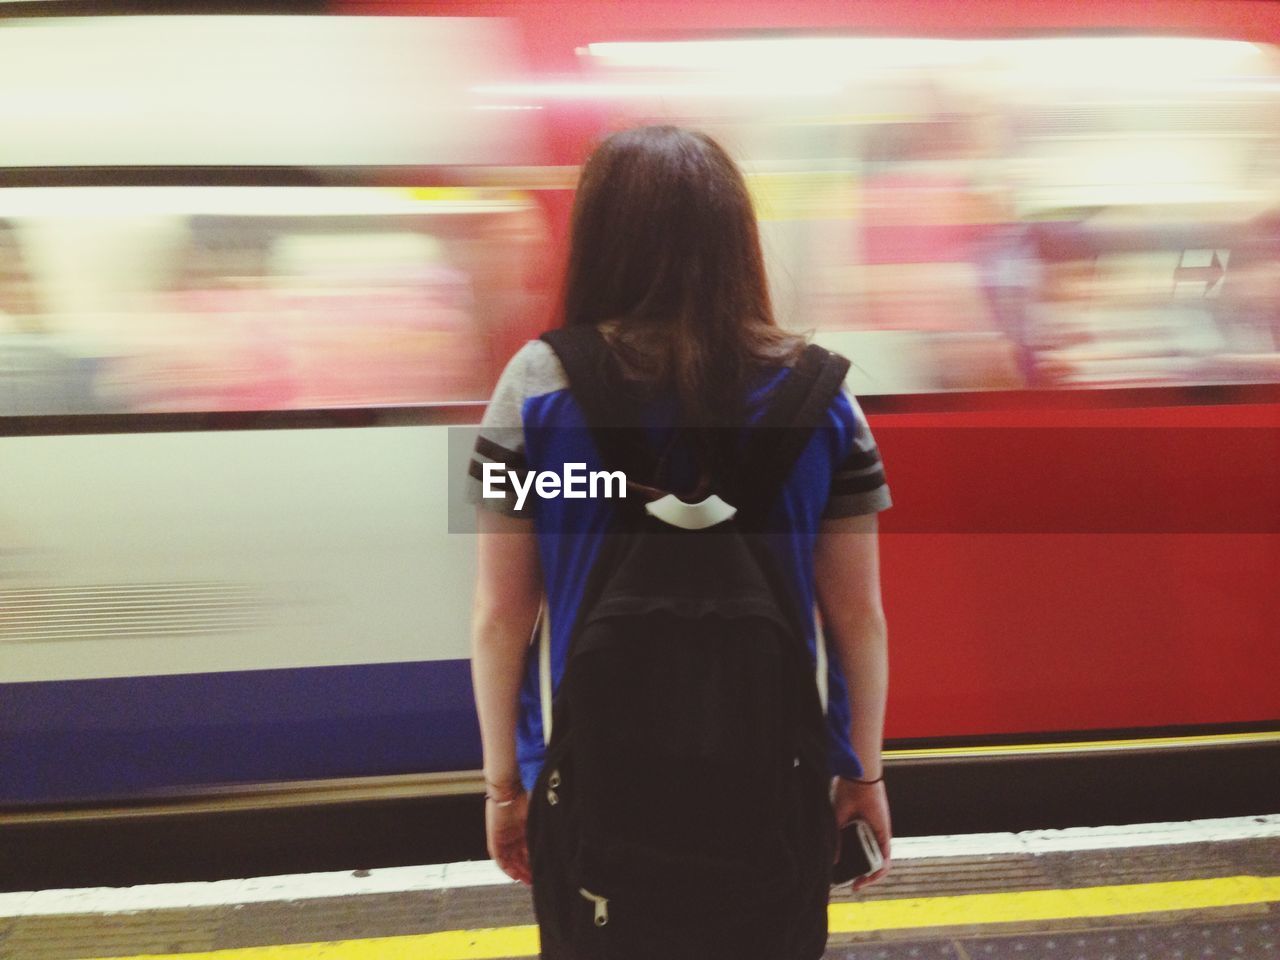 Girl with backpack in front of train